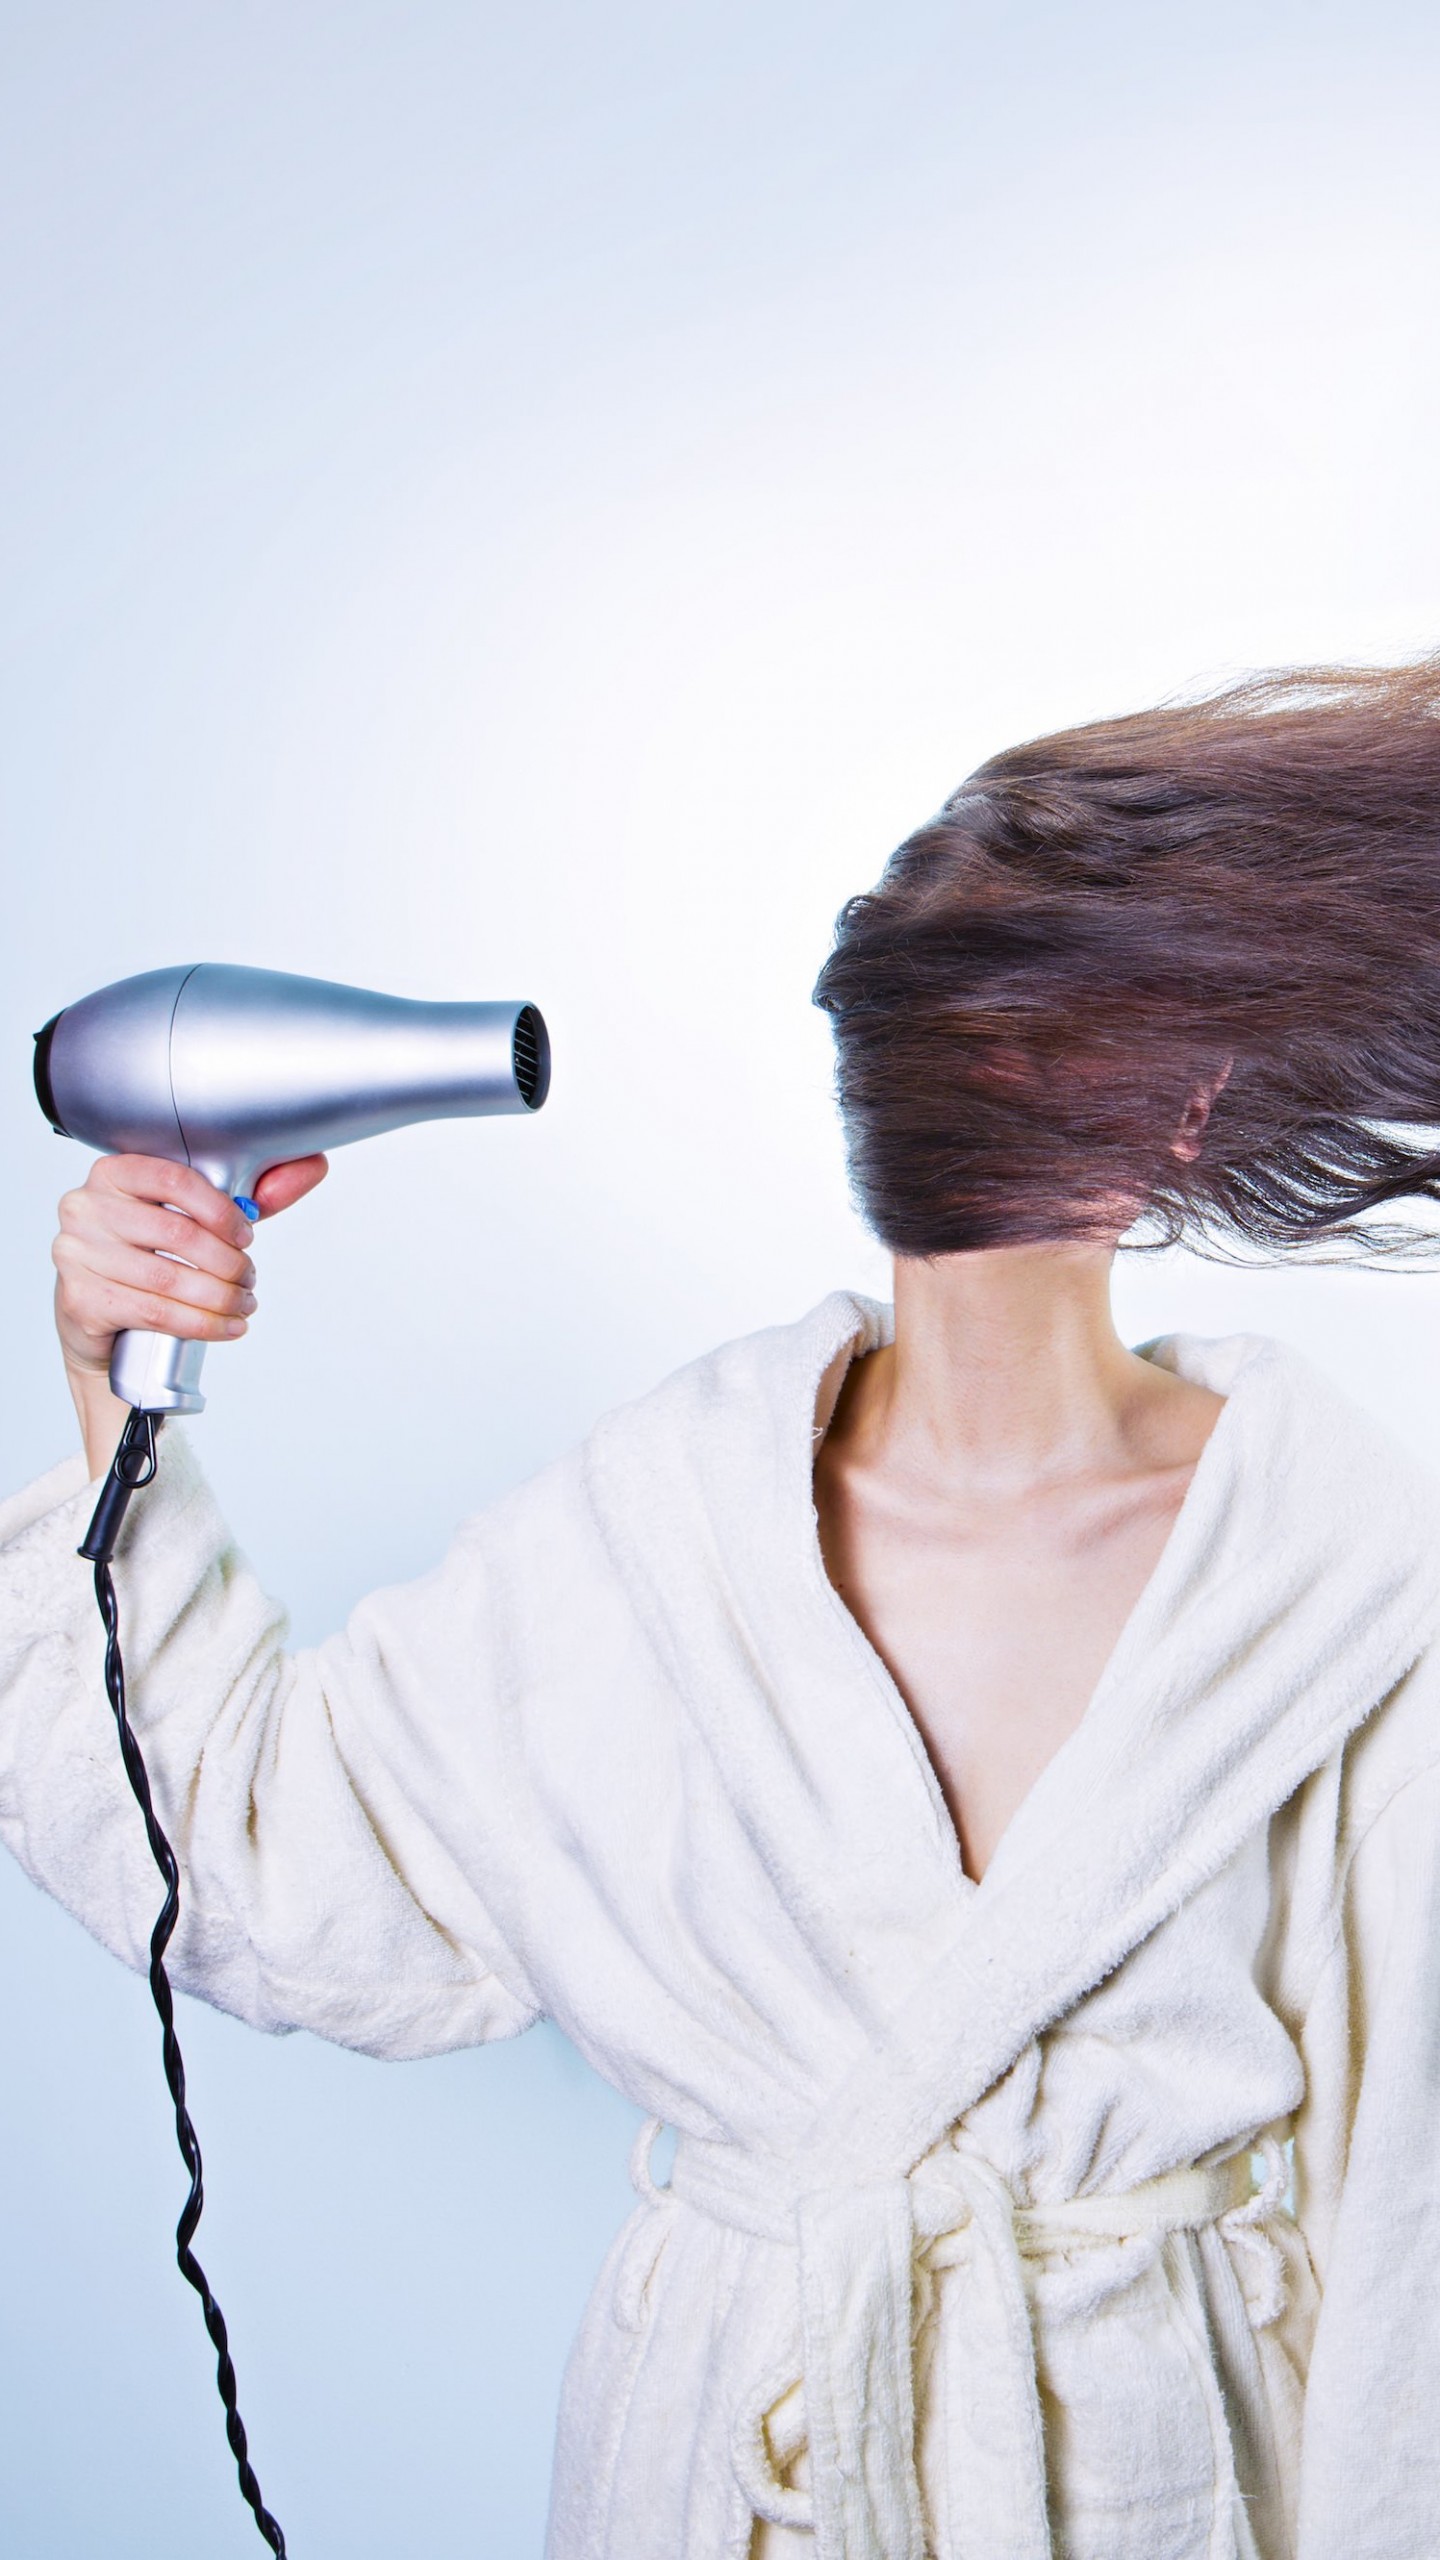 Powerful Hair Dryer Wallpaper for SAMSUNG Galaxy Note 4